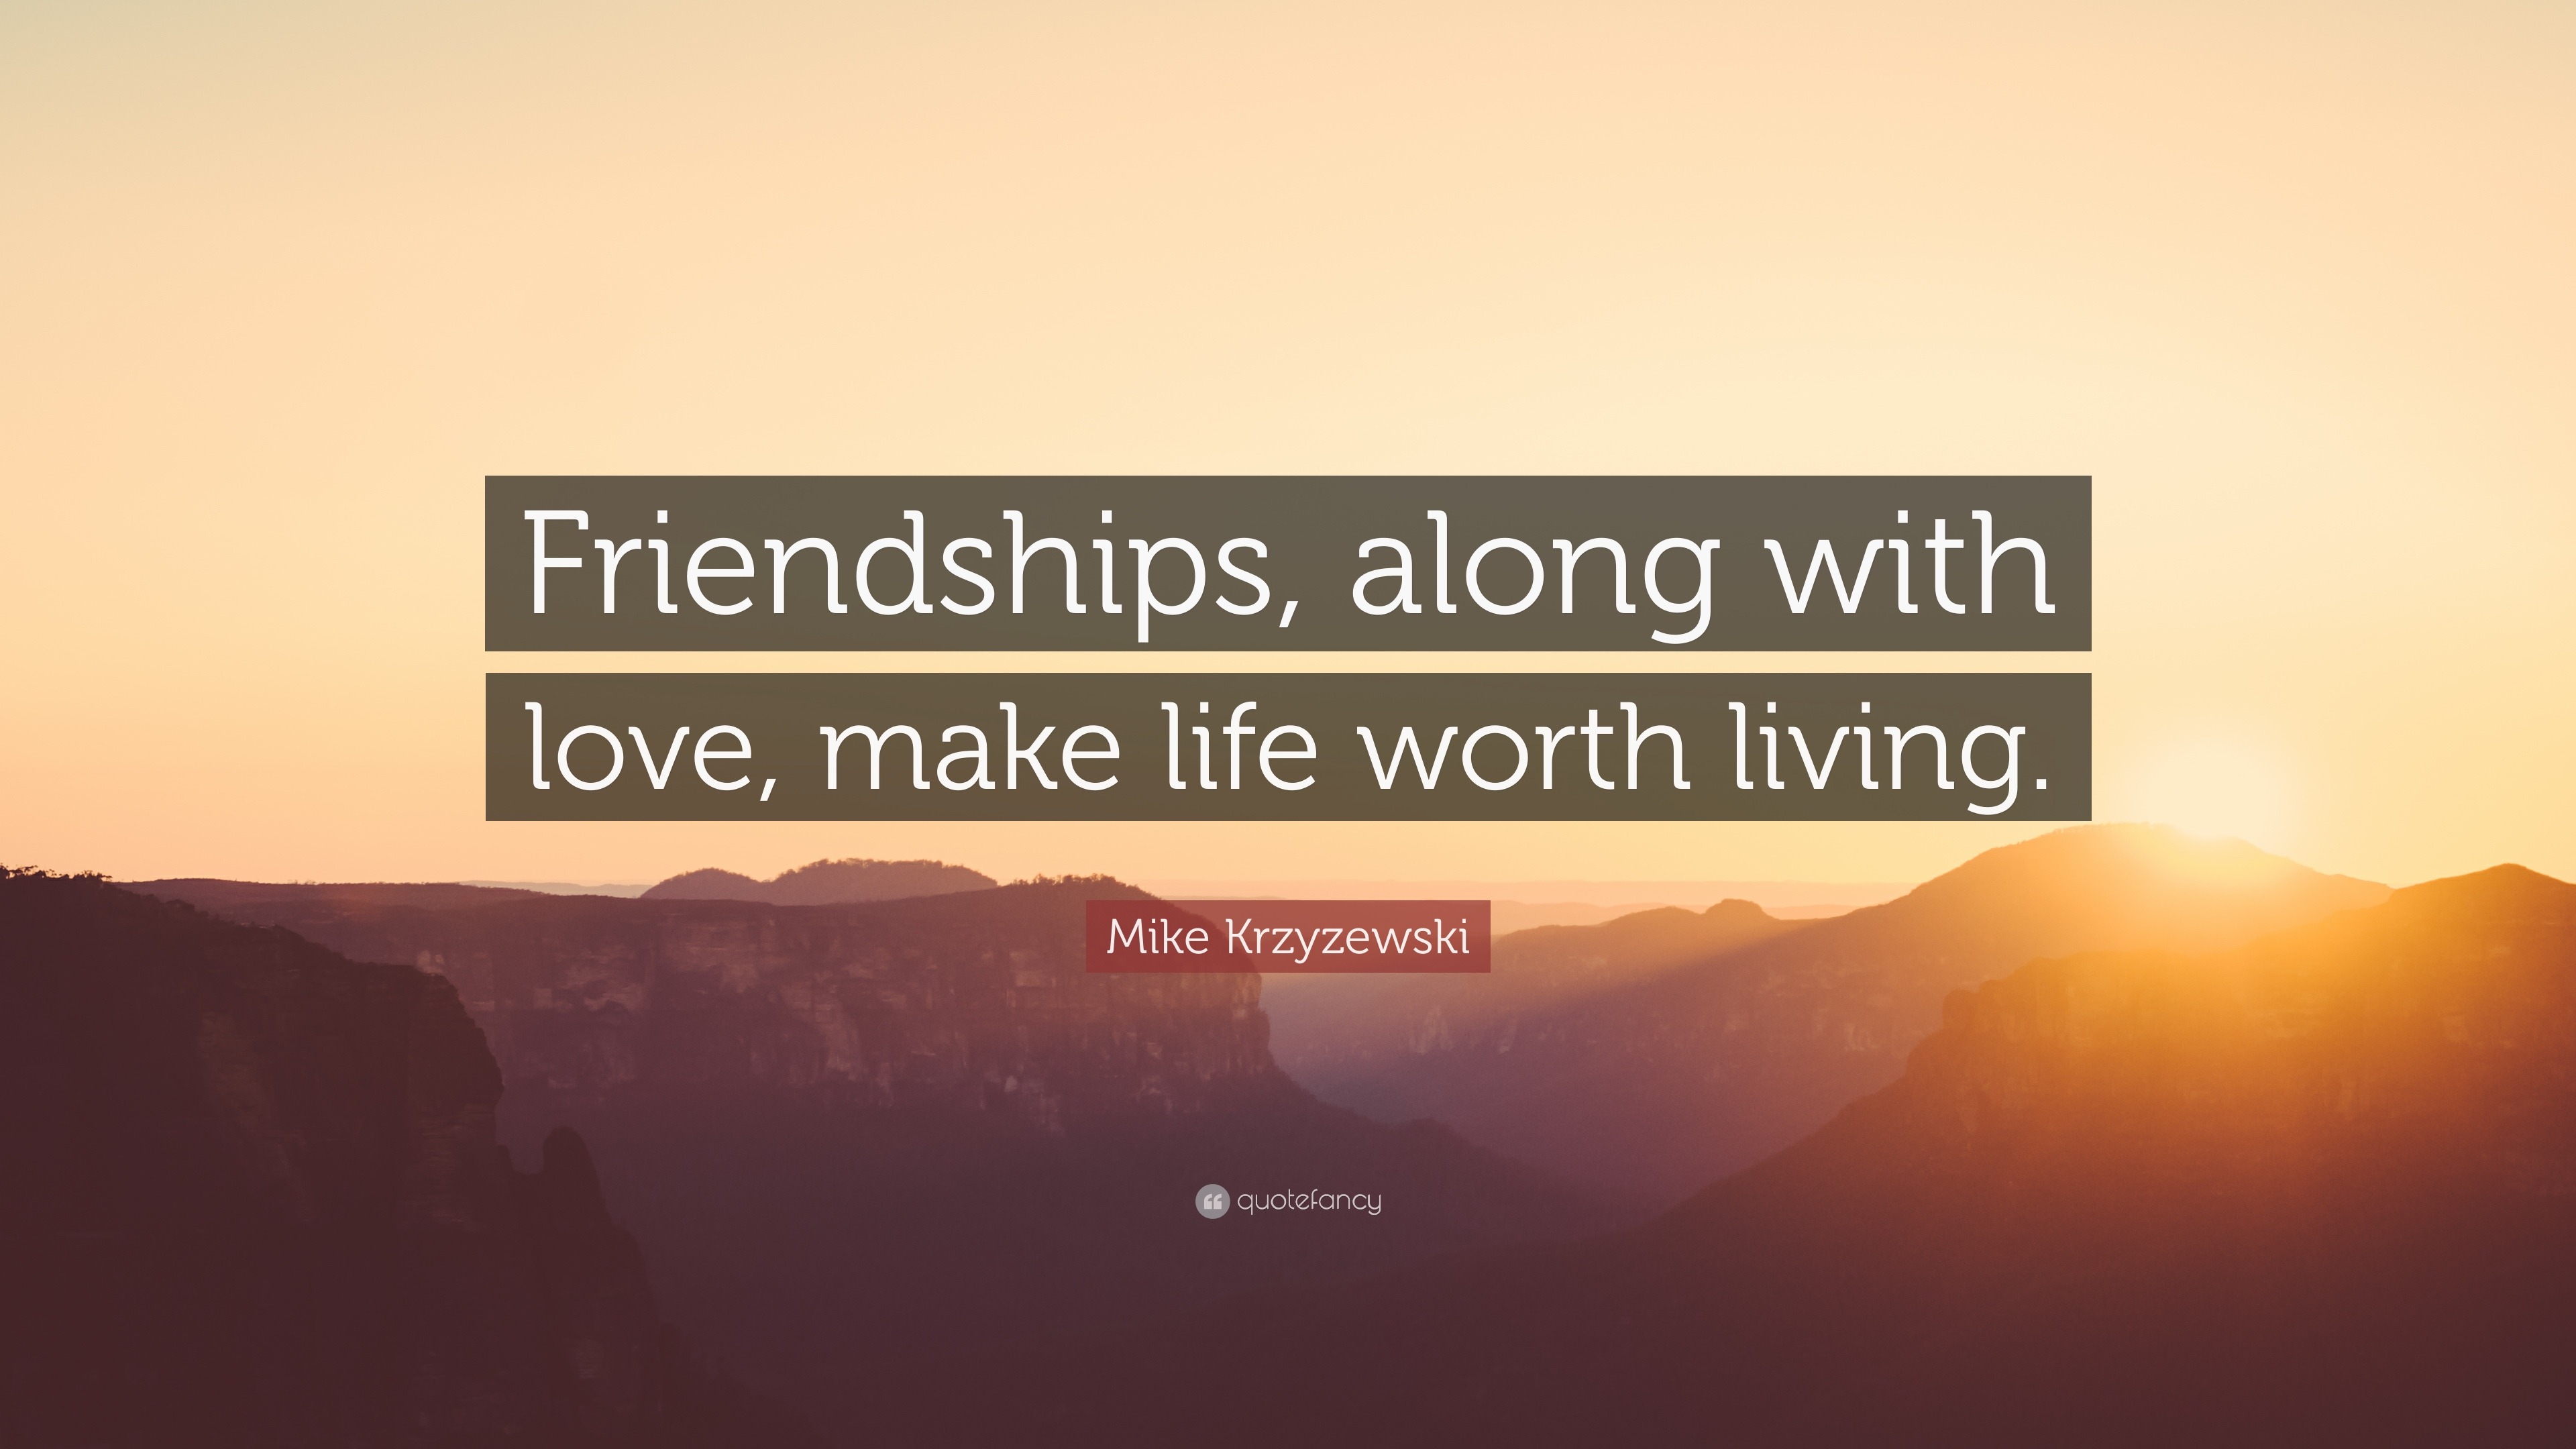 Mike Krzyzewski Quote “Friendships along with love make life worth living